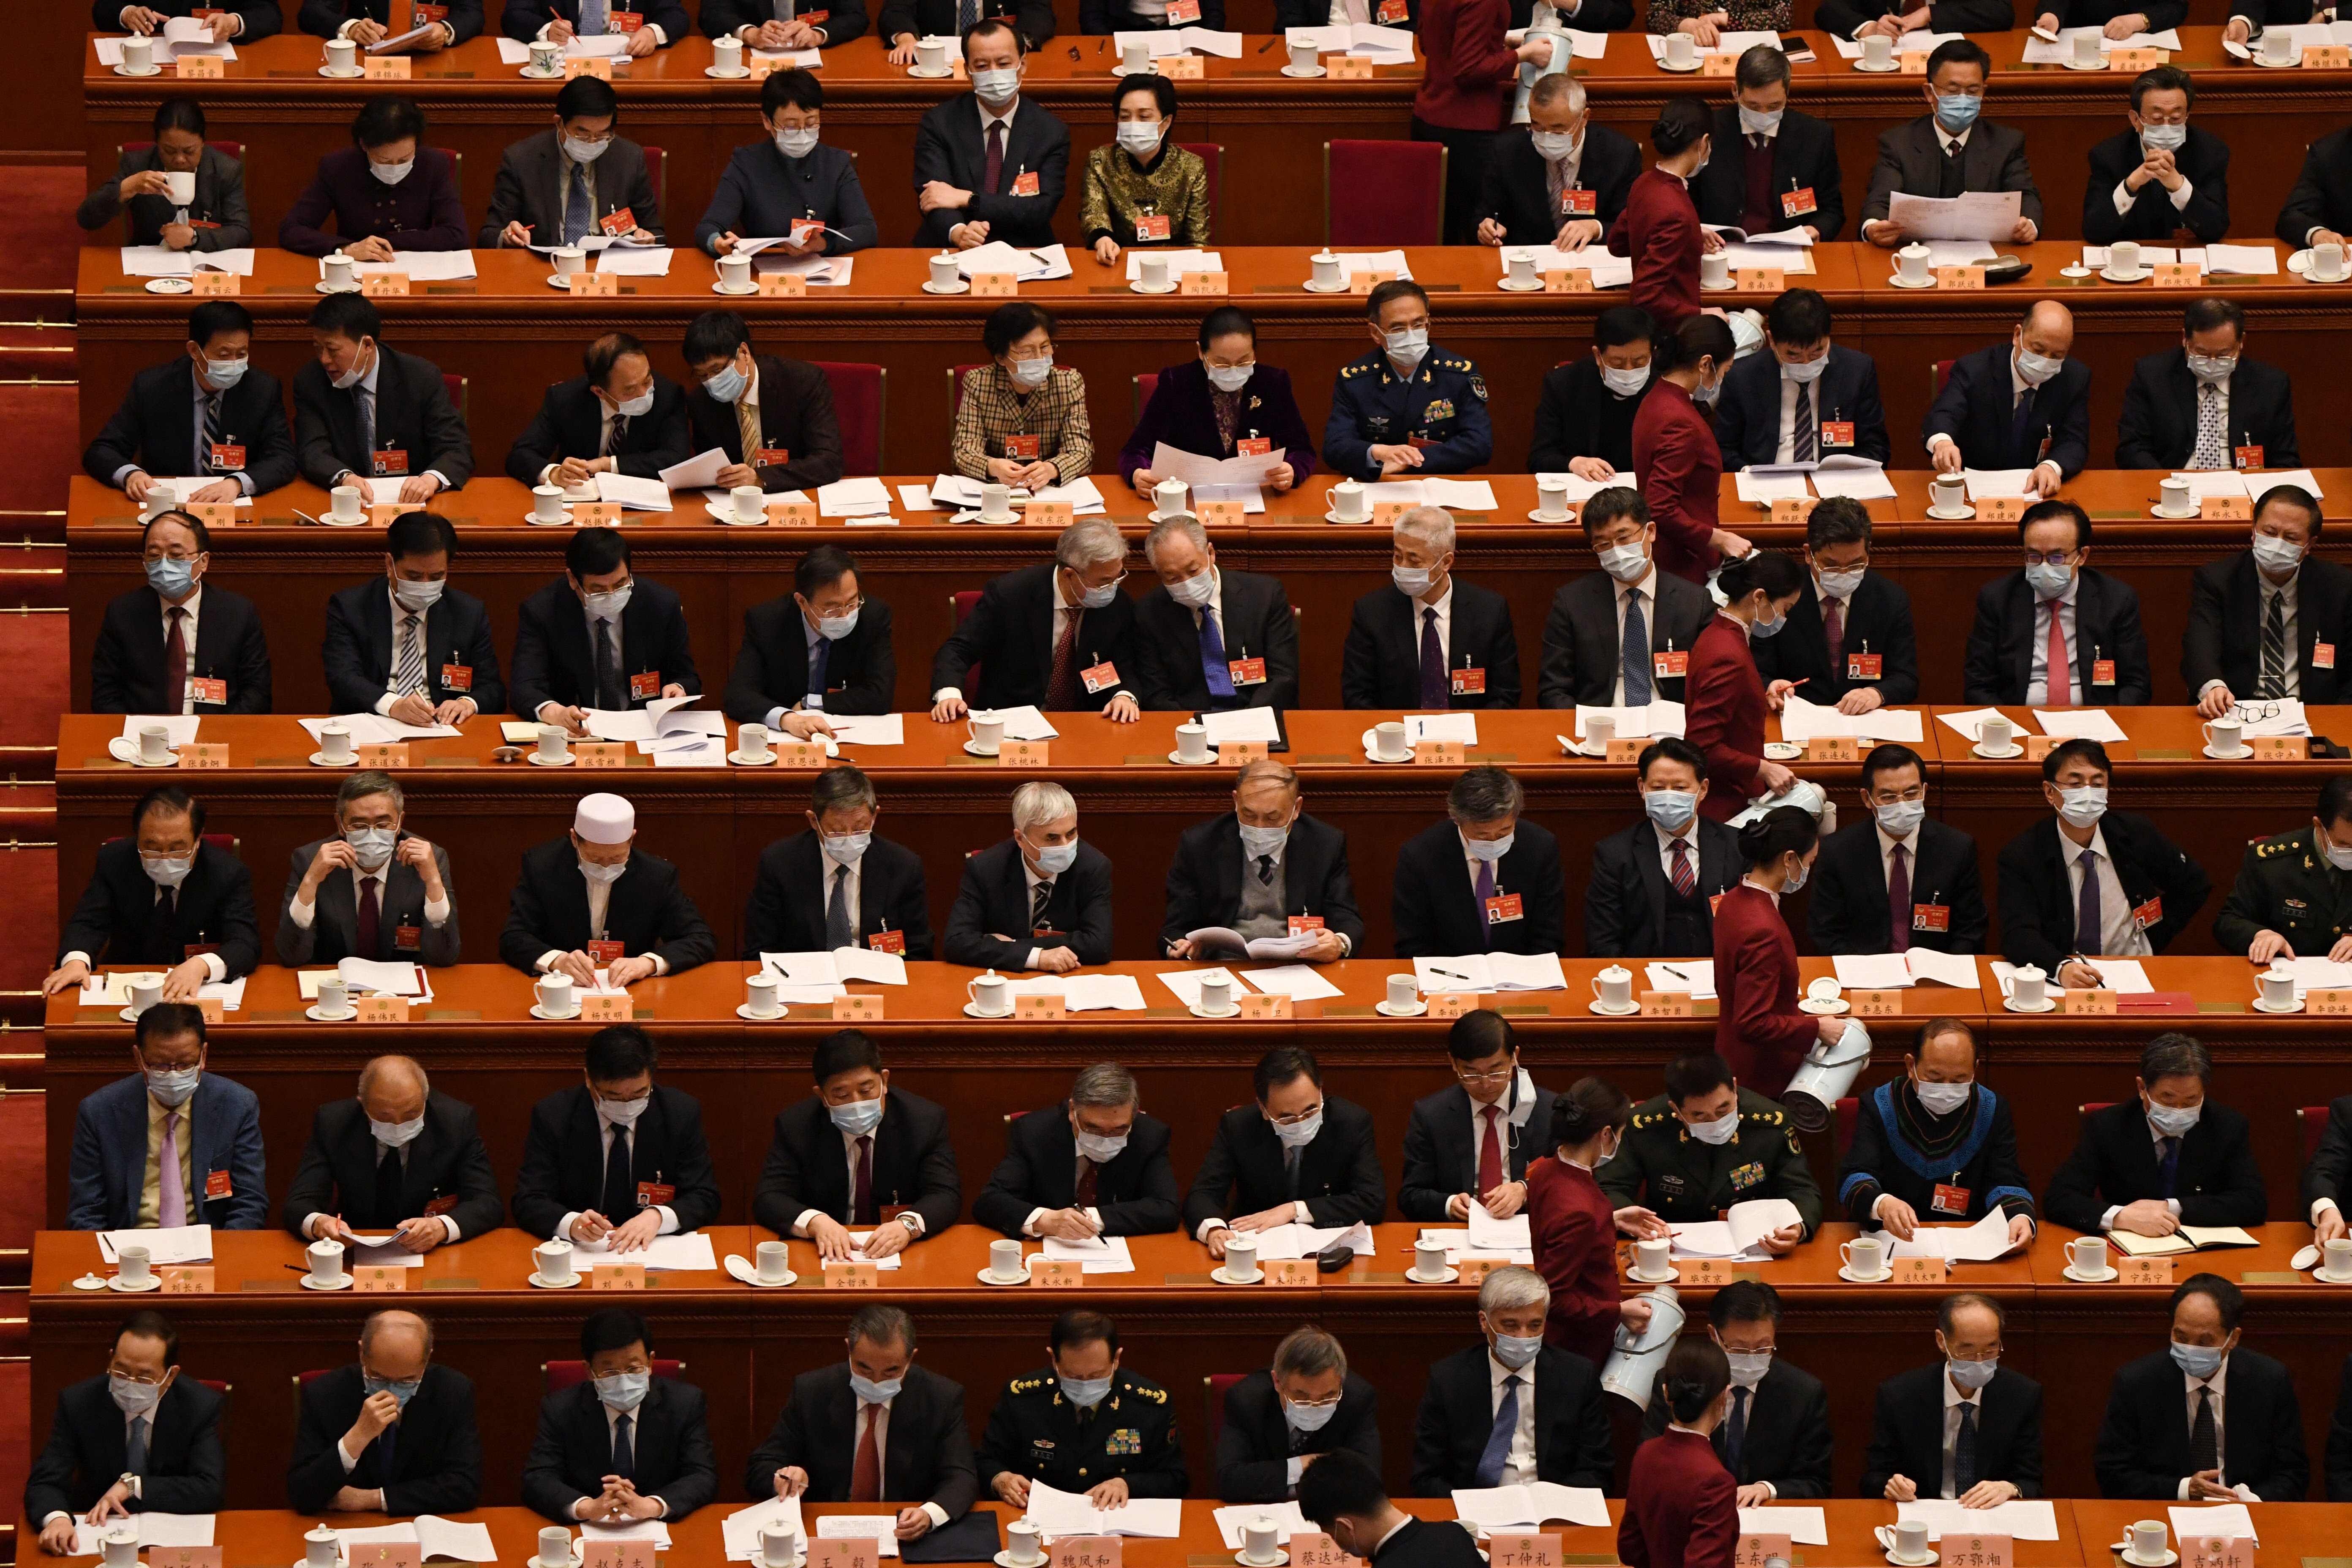 This year’s annual session of the Chinese People's Political Consultative Conference has been asked to consider relaxing restrictions on overseas academic exchanges. Photo: AFP